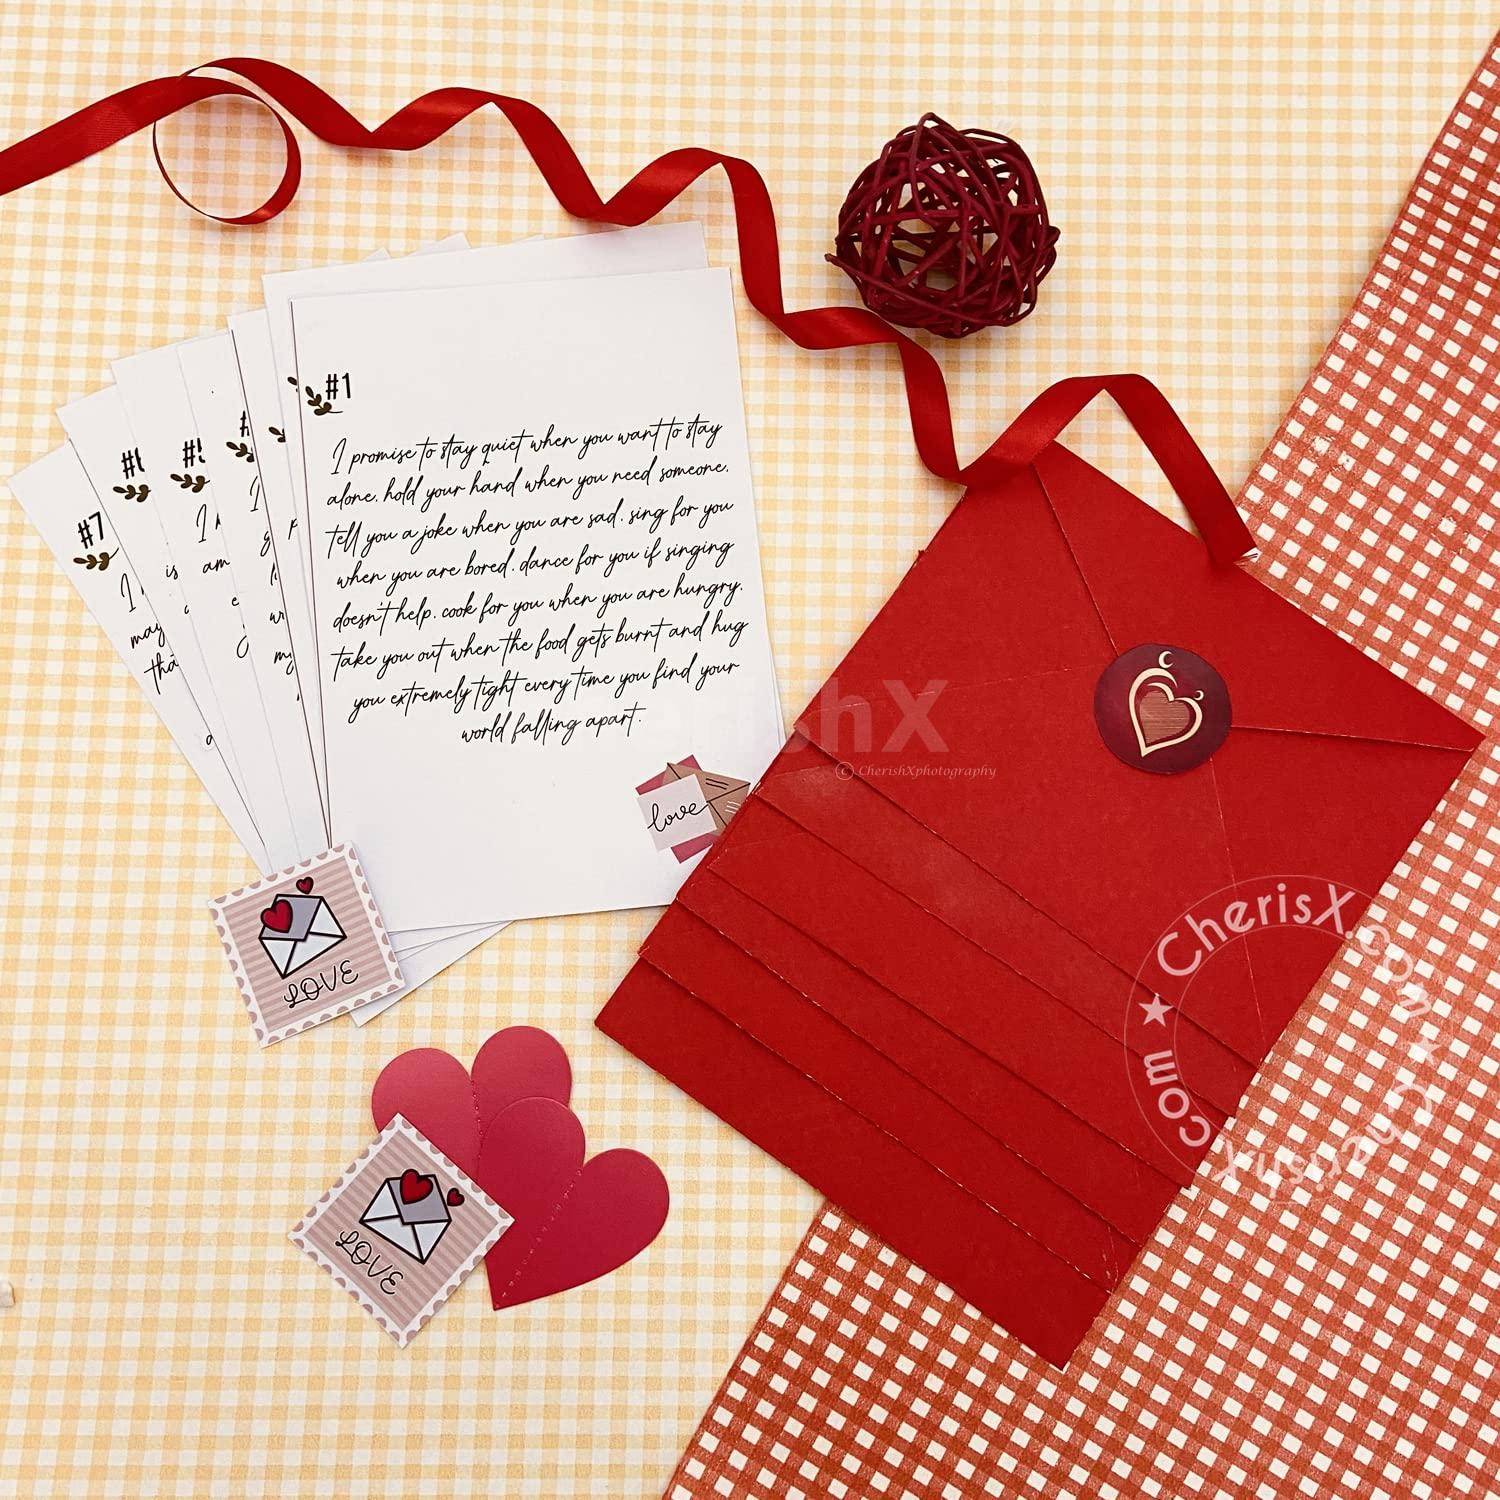 Celebrate this Valentine's Day and week beautifully with CherishX's Exclusive Valentine's Feeling Loved Hamper Gift!